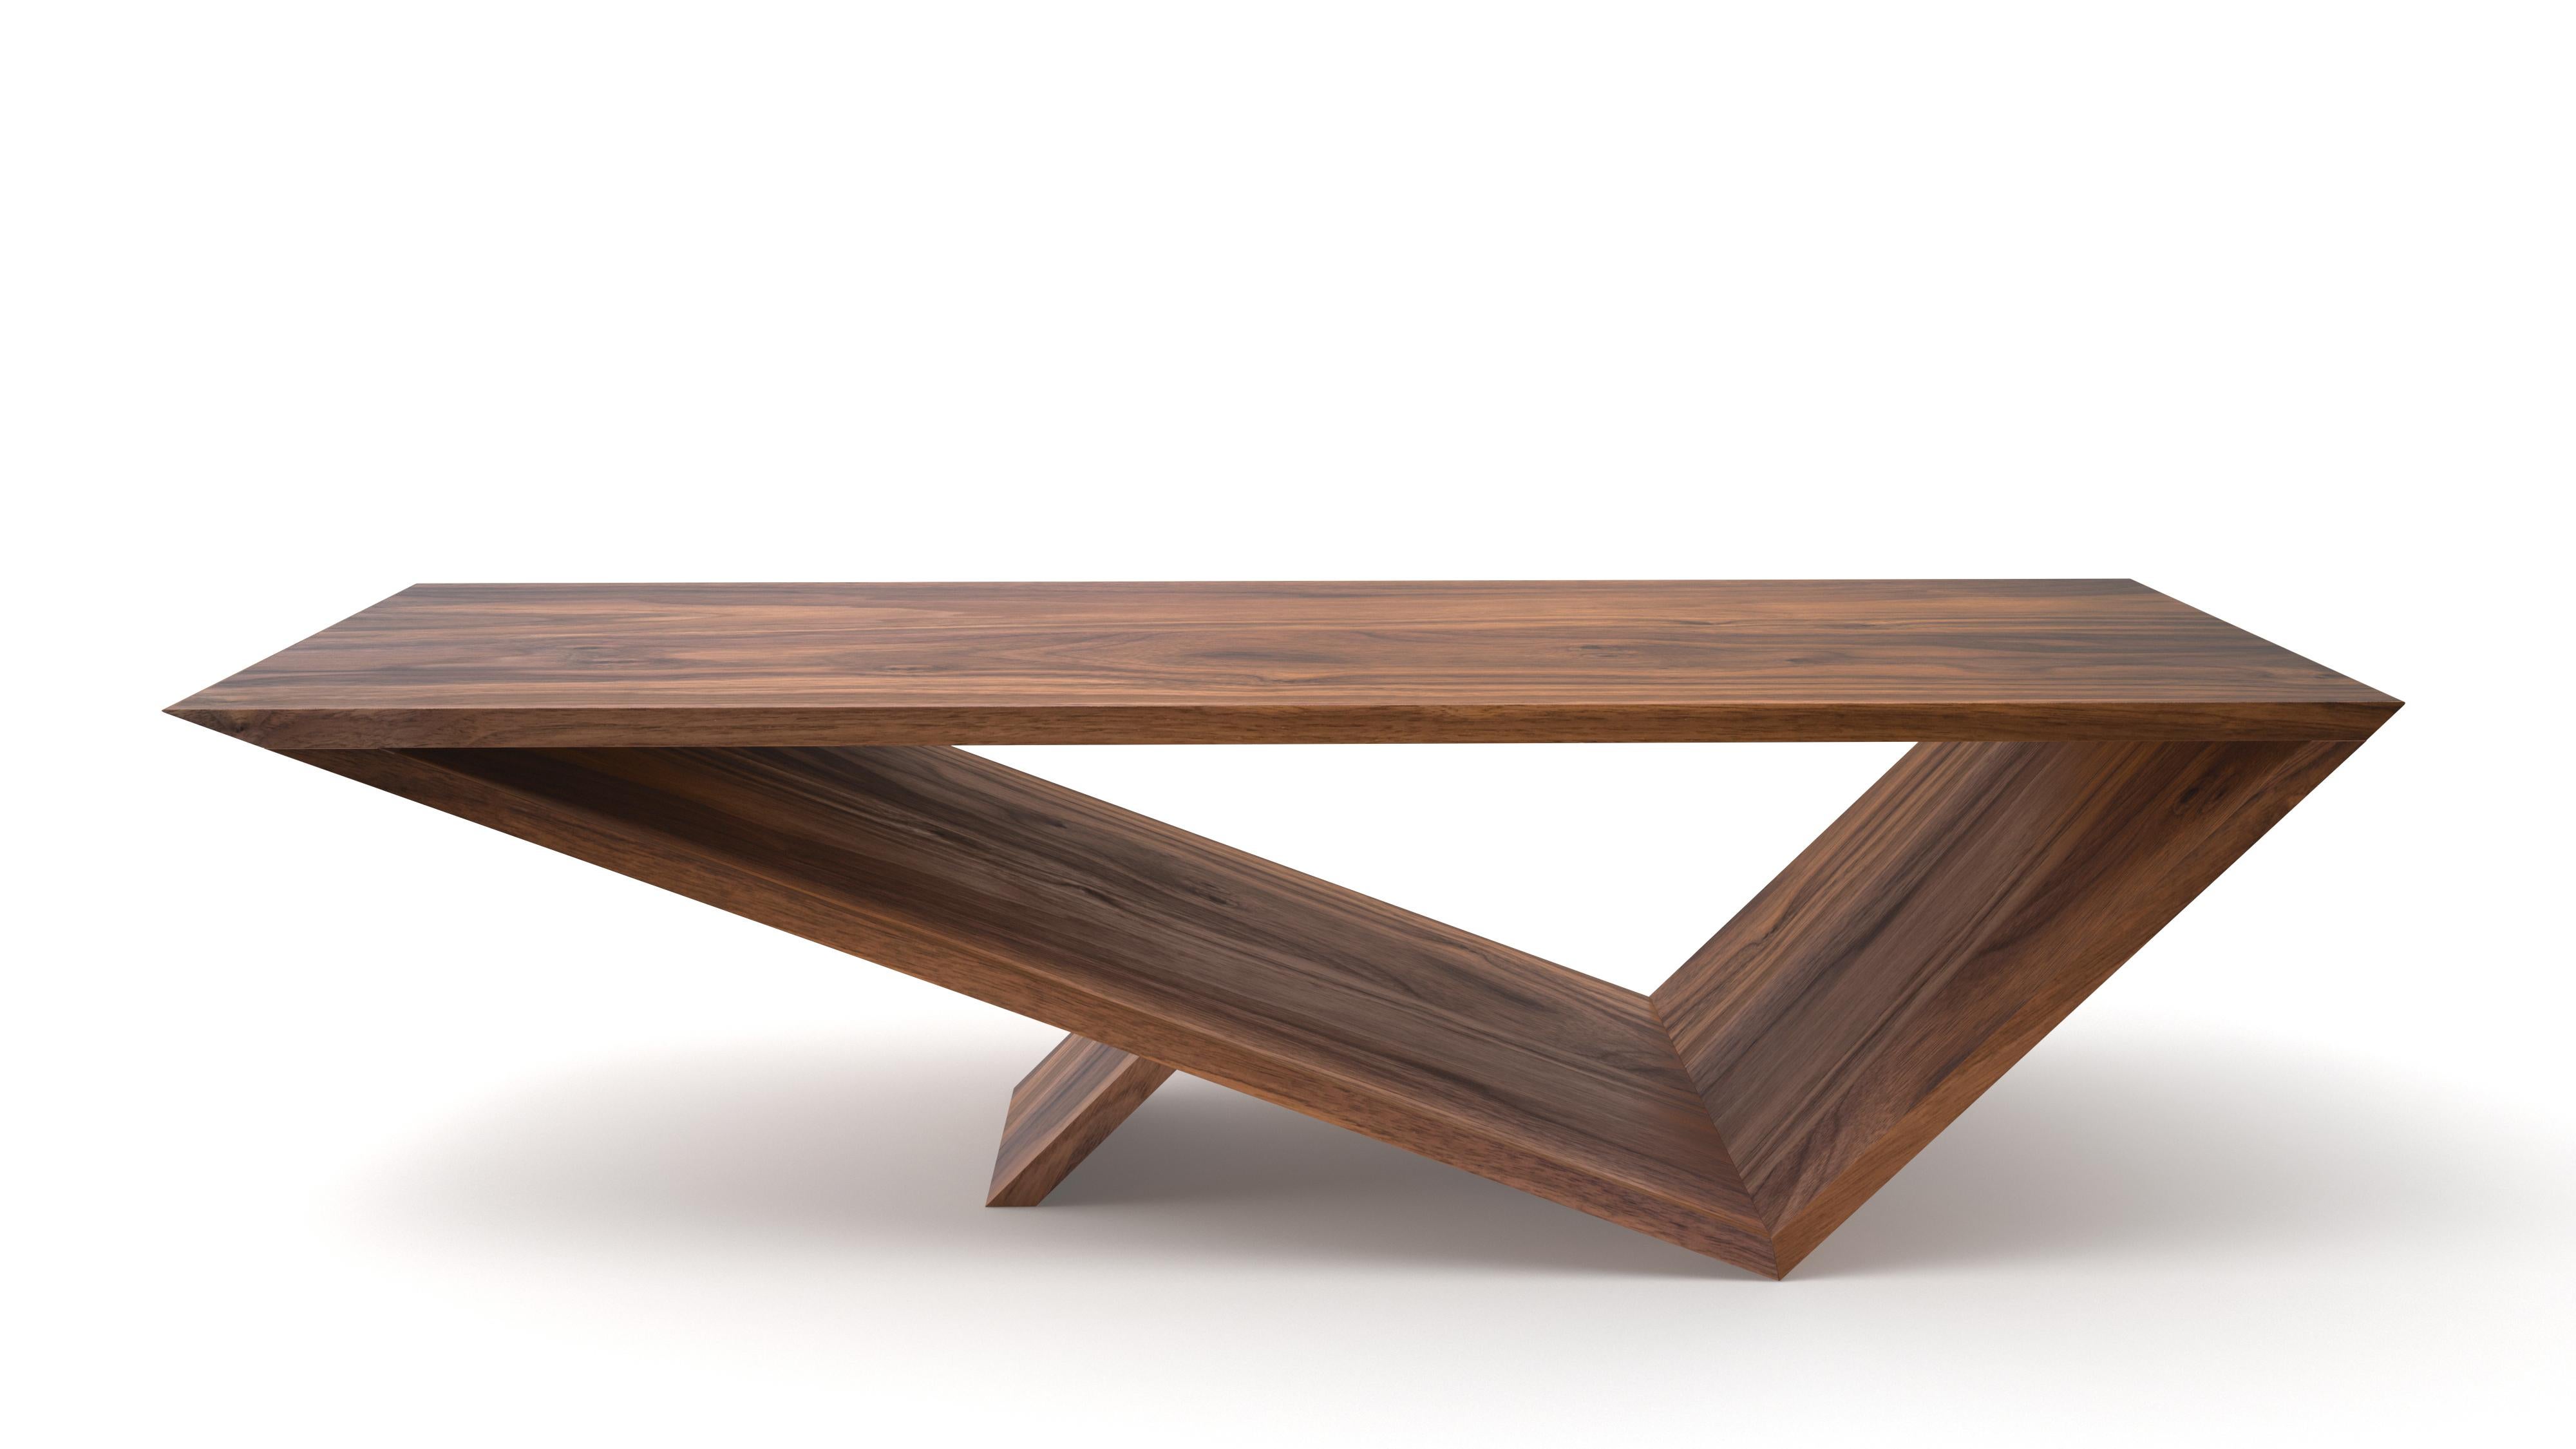 Time/Space Portal Table in solid walnut hardwood.

The inspiration for the Time/Space Portal Table collection comes from the power, simplicity, and elegance of the triangle.
This is an ongoing series exploring the dynamics of balance, weight,